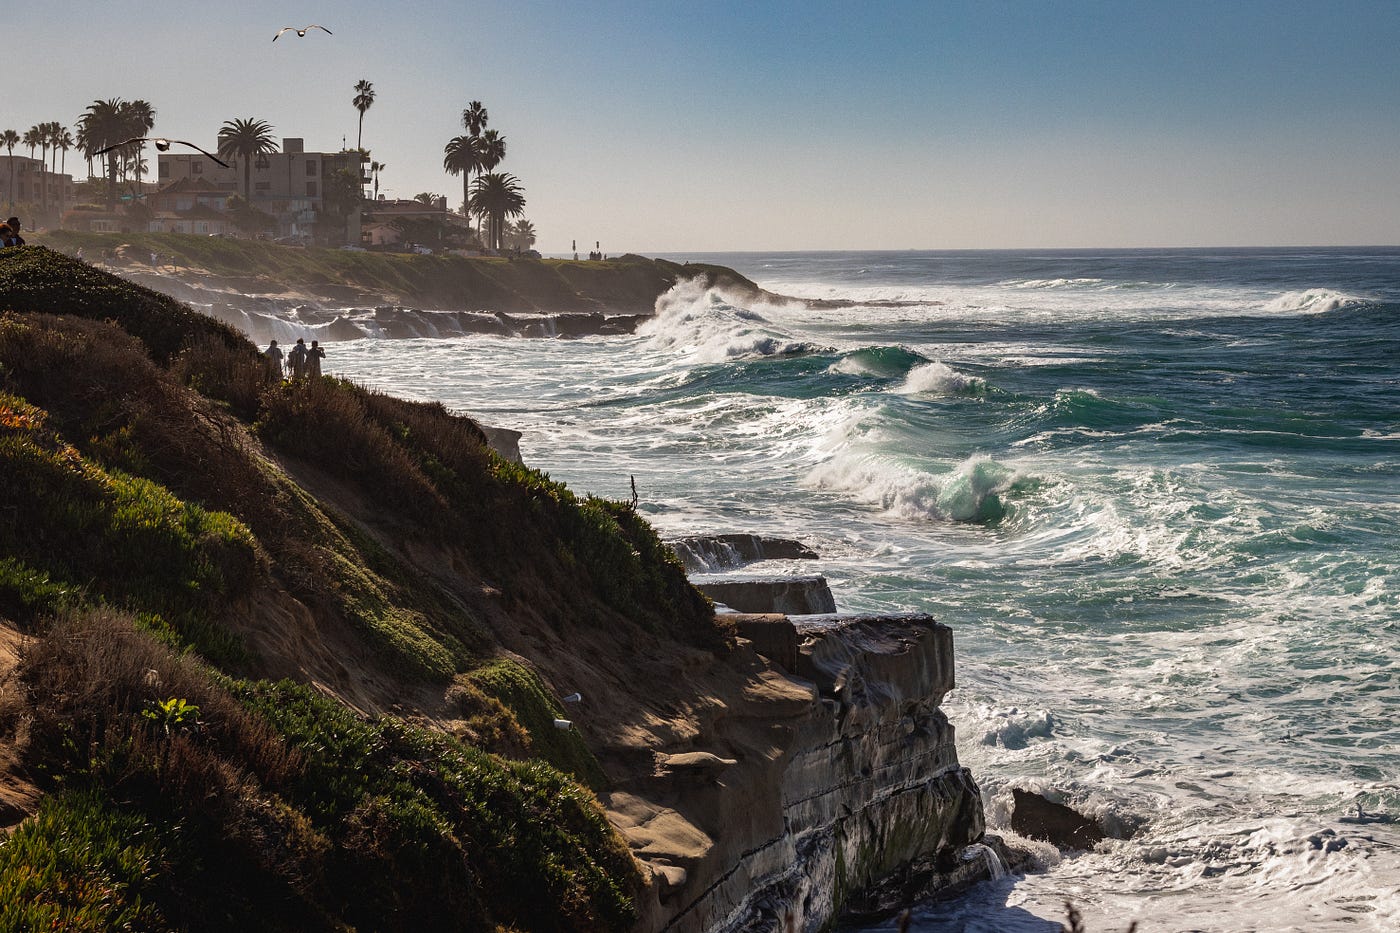 The La Jolla Cove Seals: 8 Things You Need to Know Before Visiting